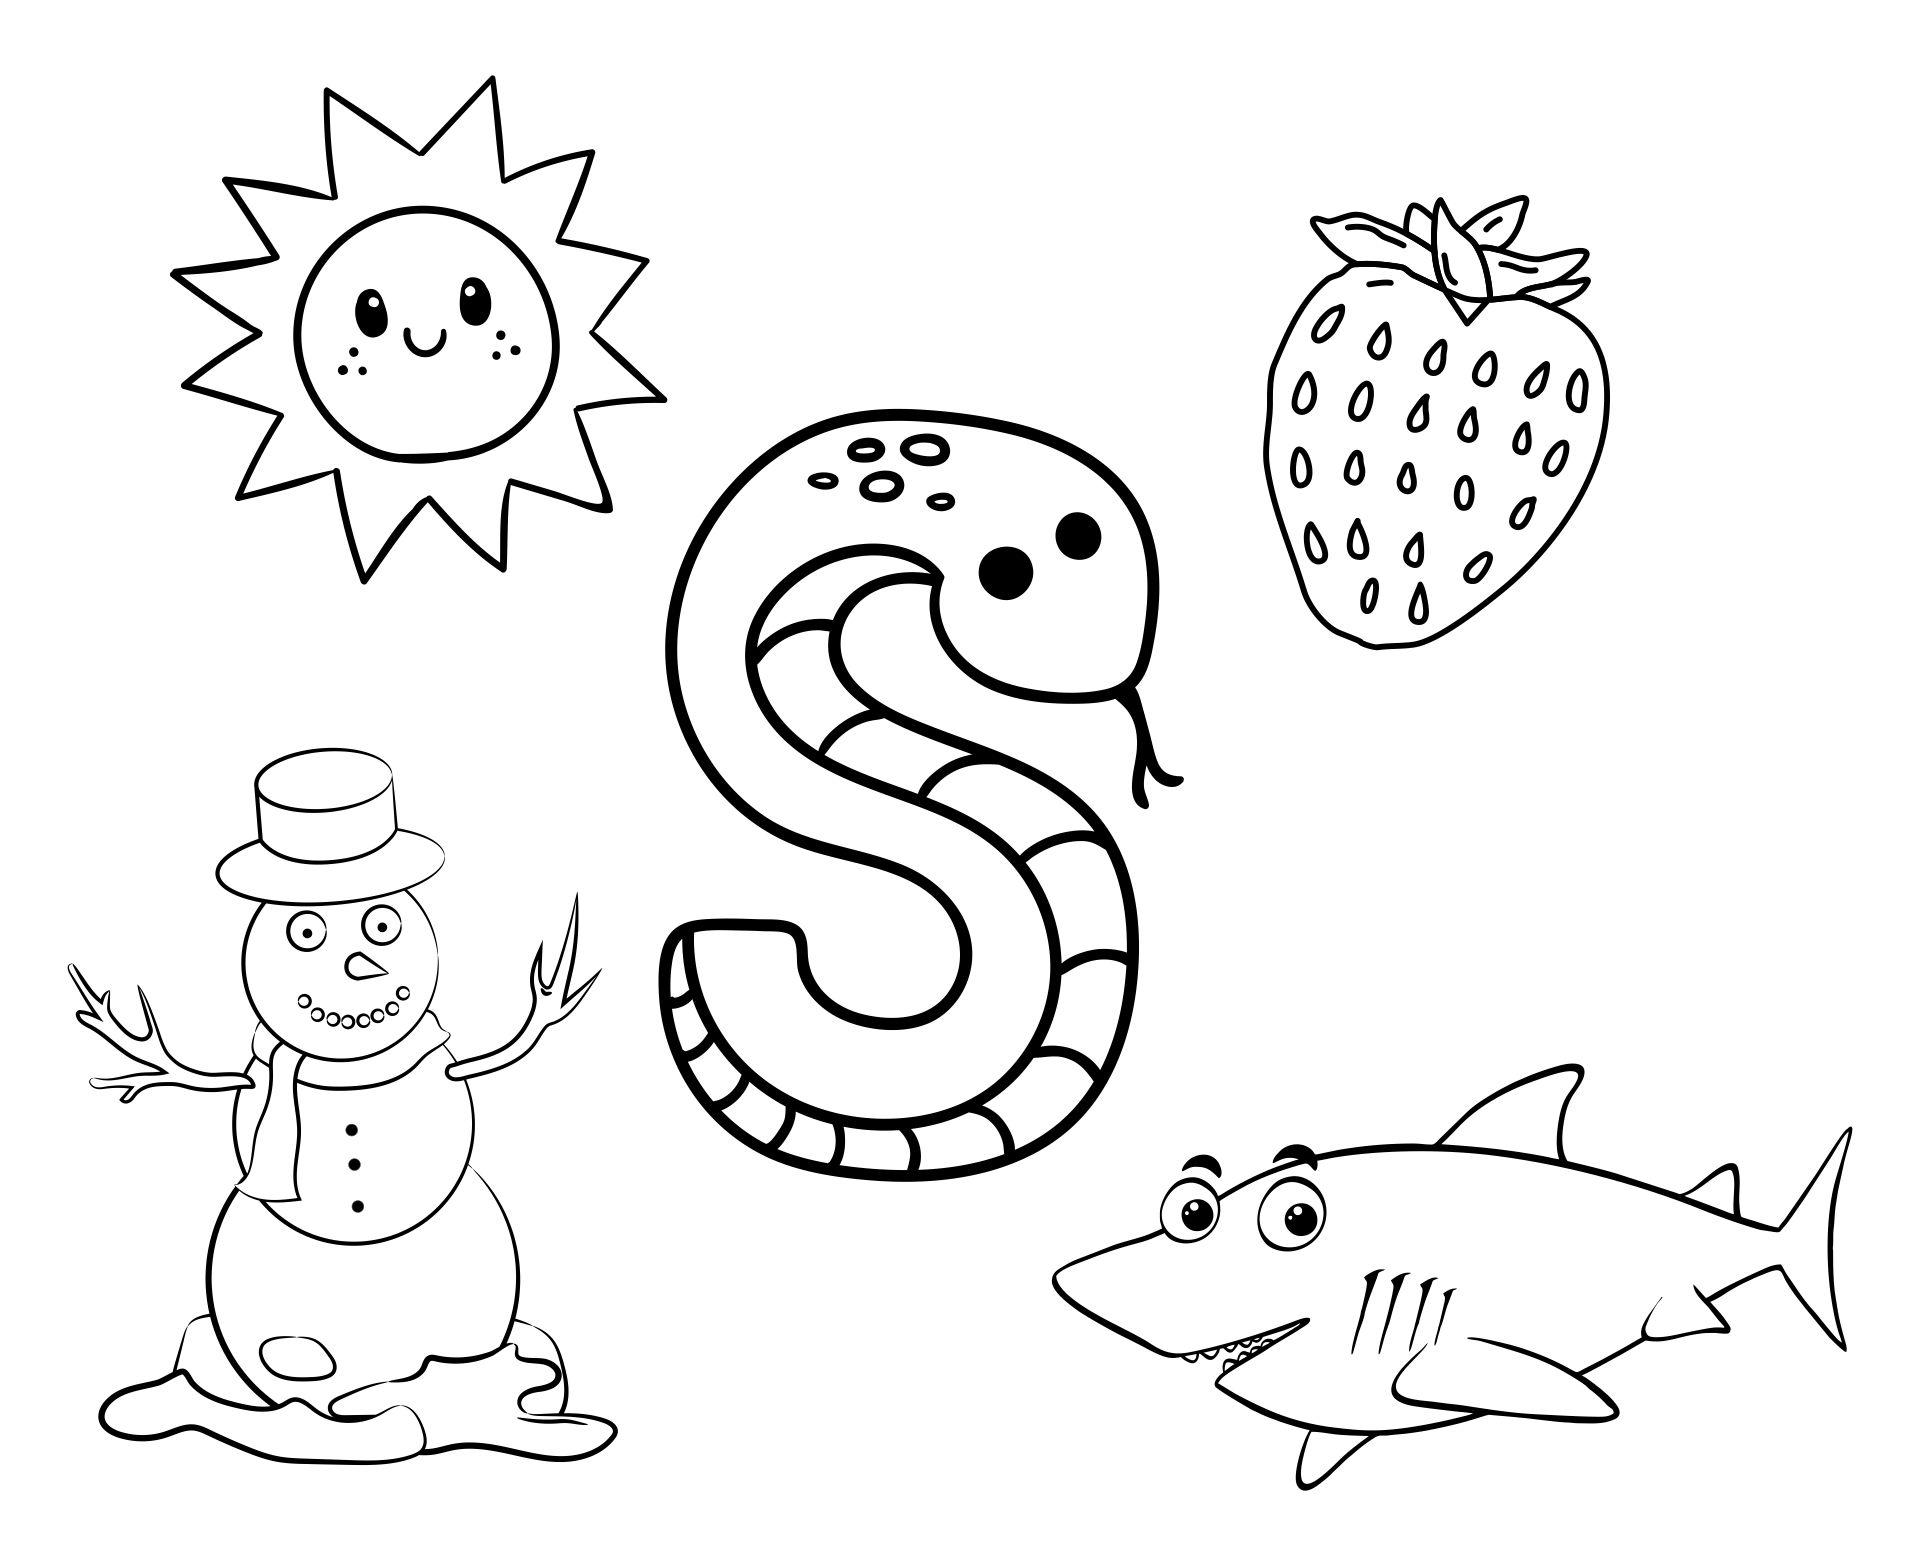 Things That Start with S Coloring Page